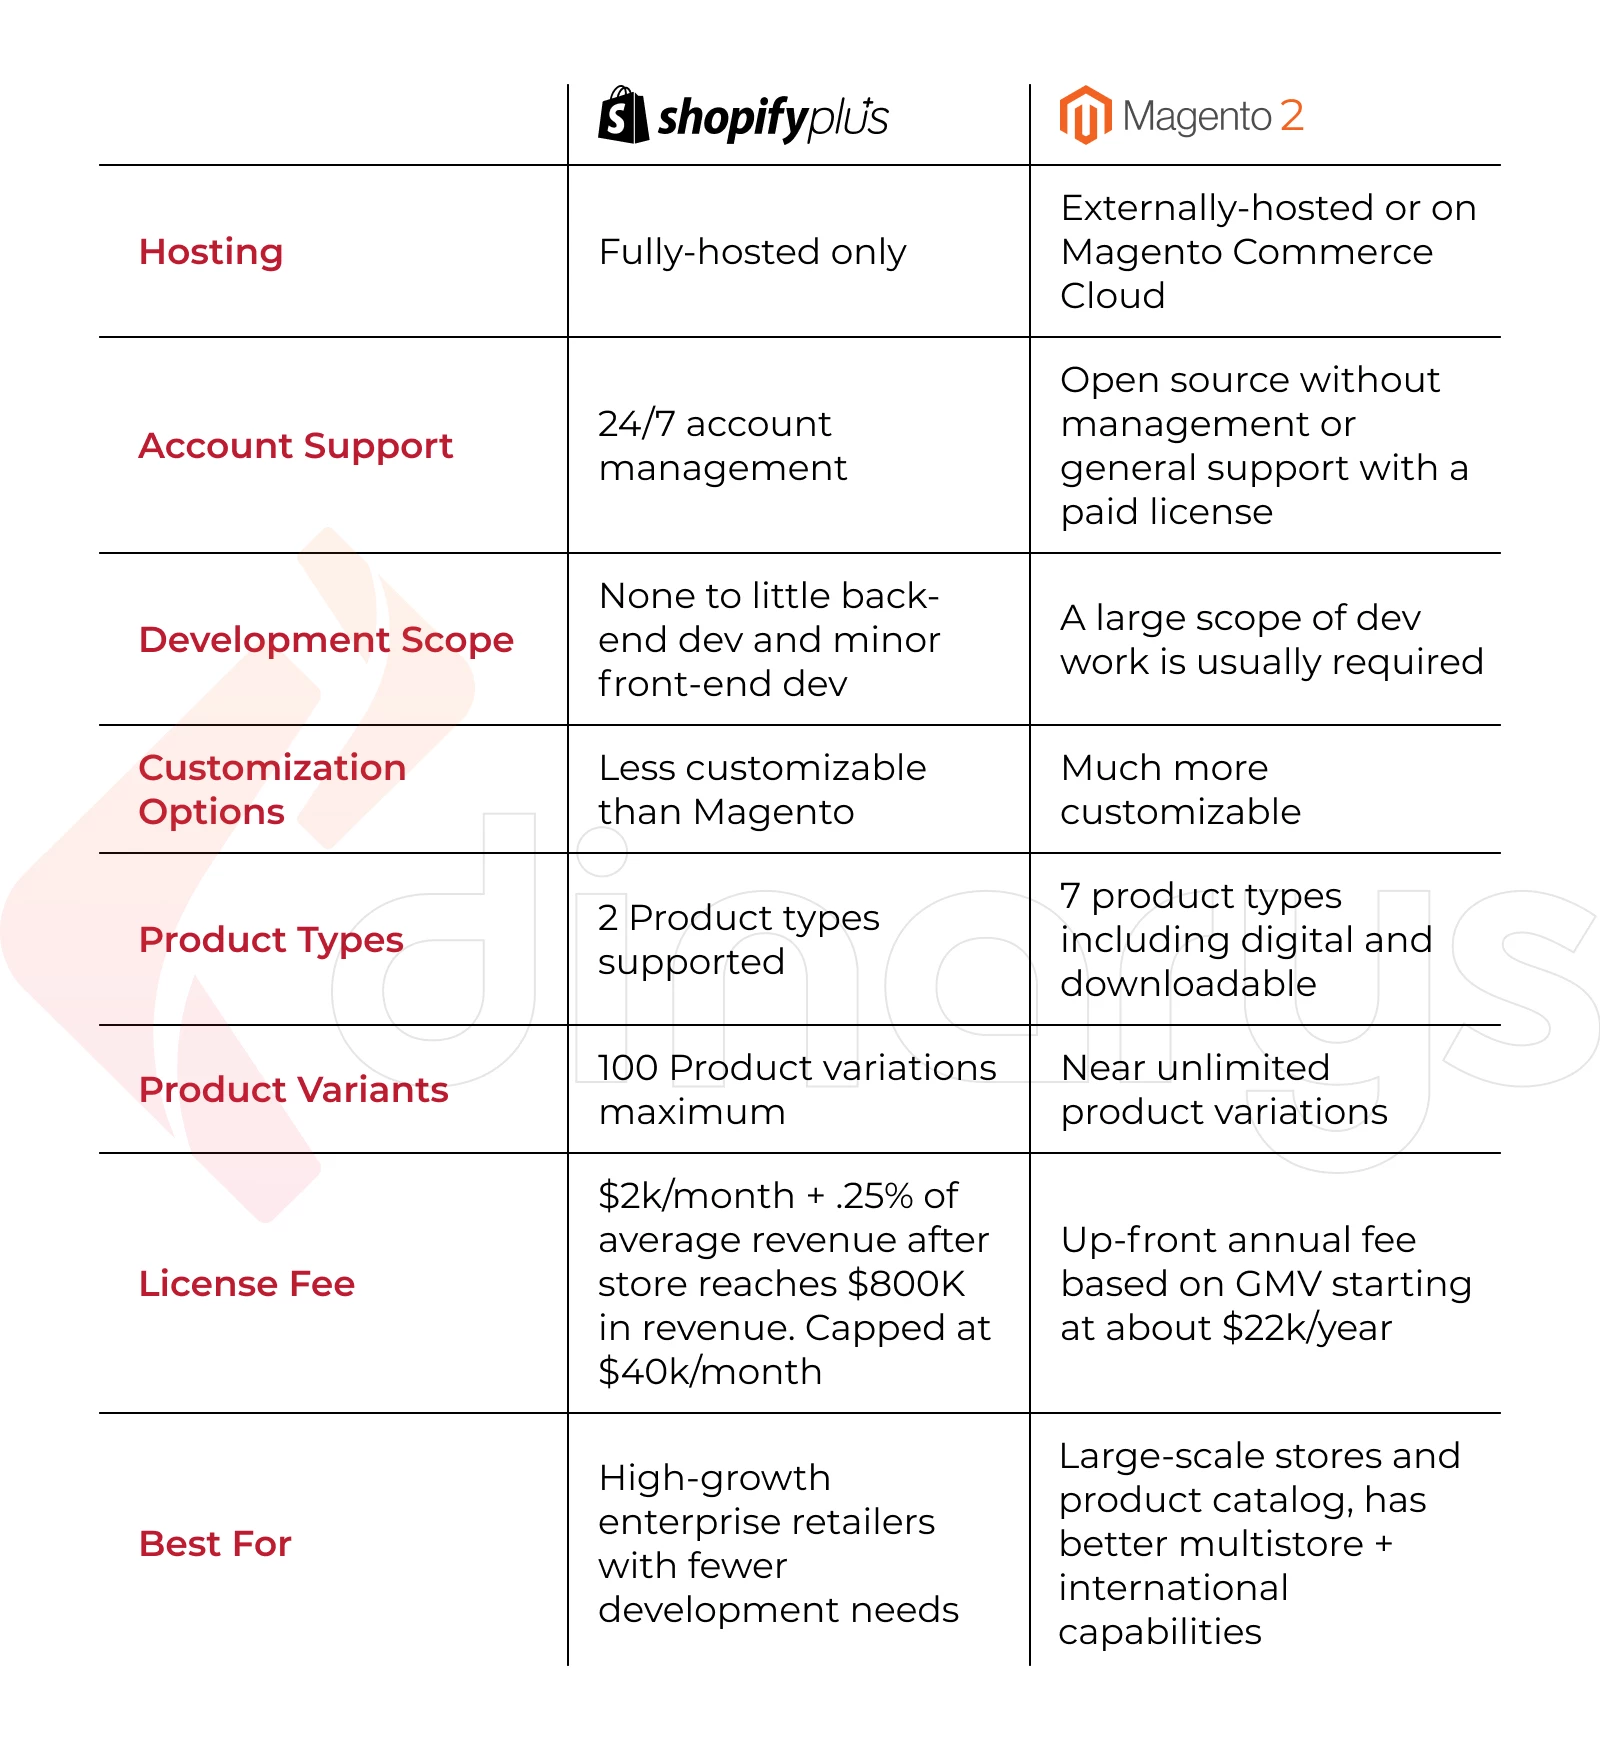 The main differences between Magento and Shopify